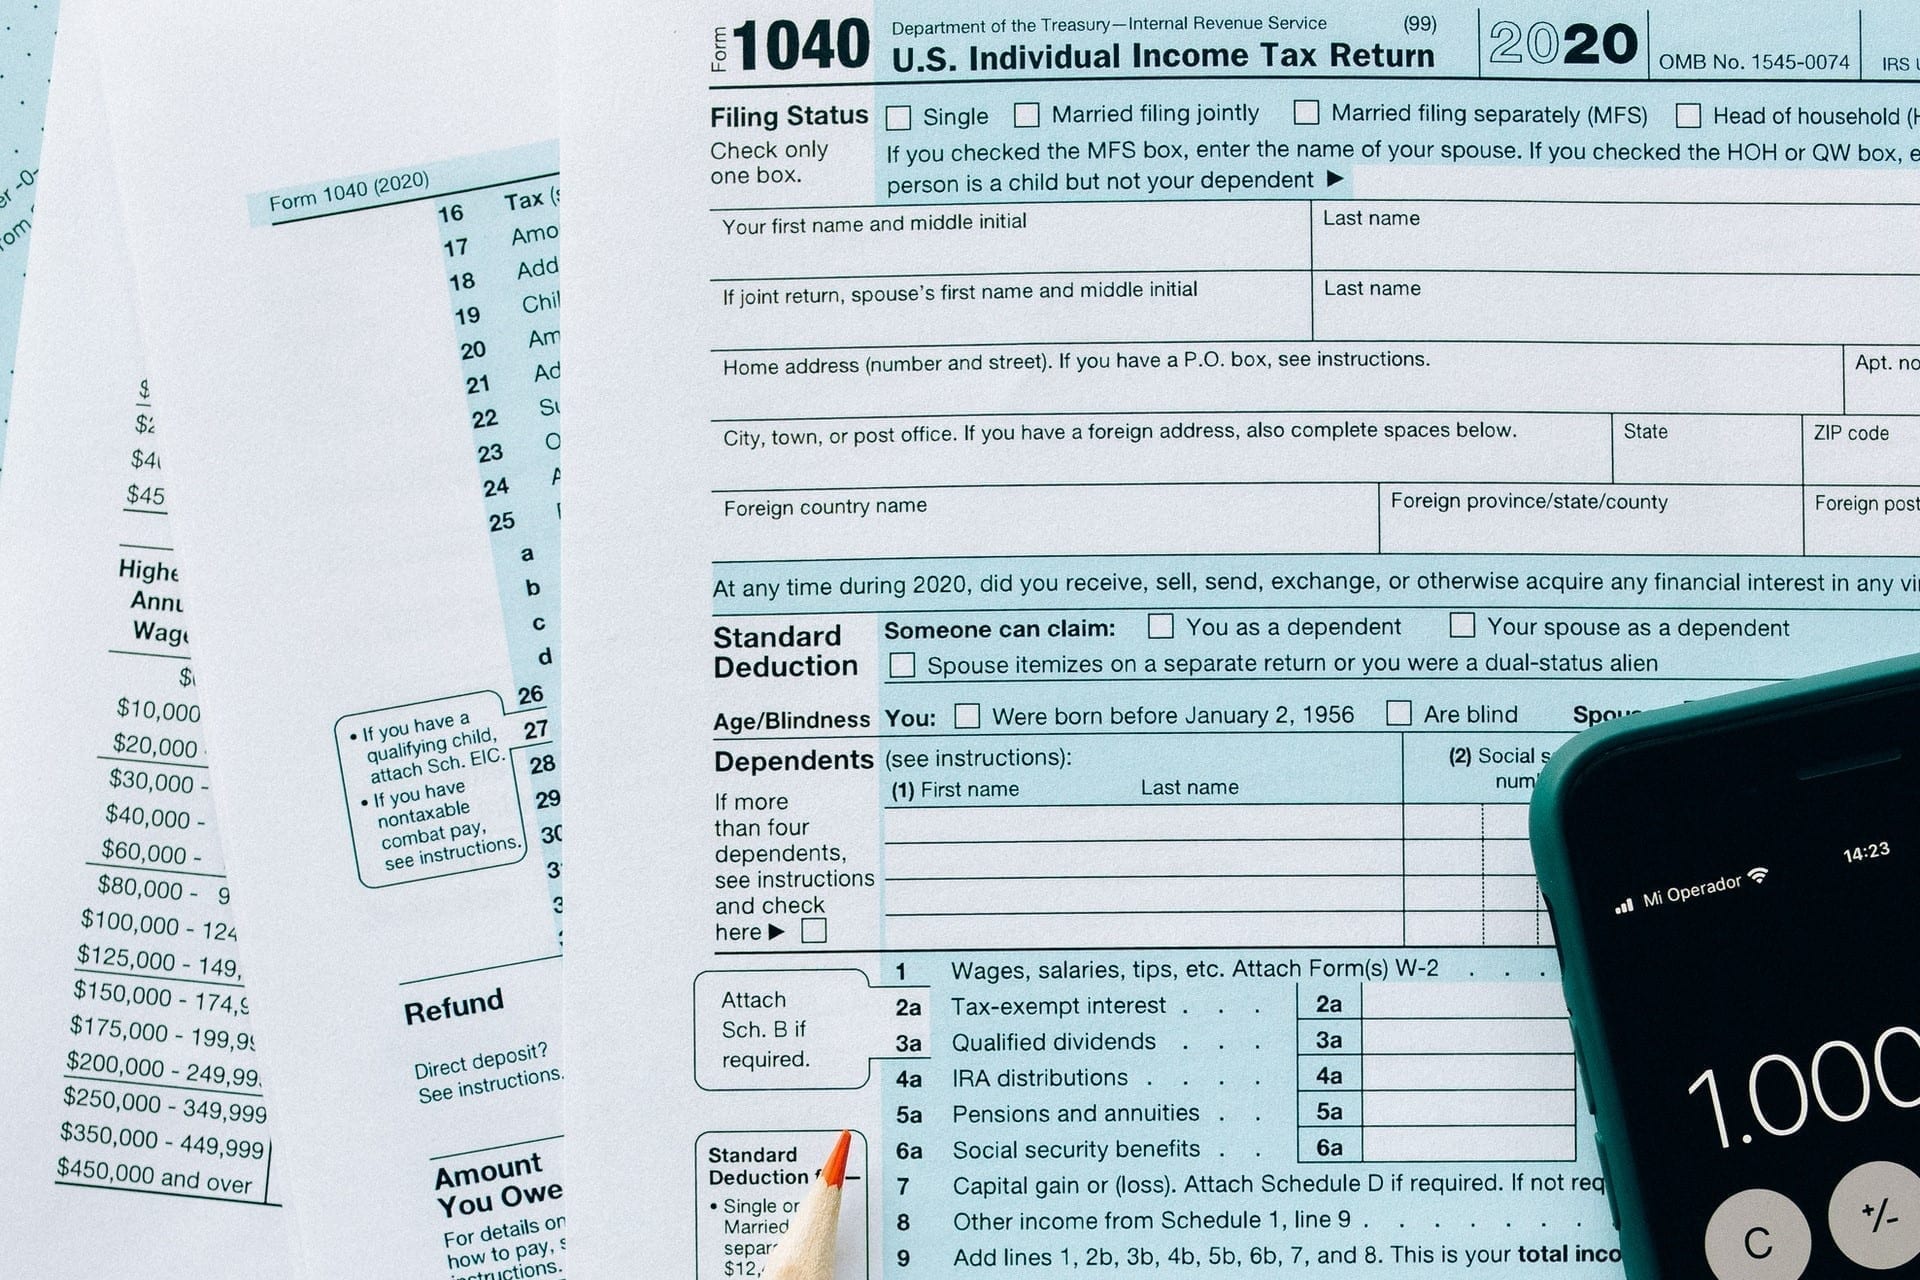 If your spouse is incarcerated you may need to take special considerations before filing your tax return.